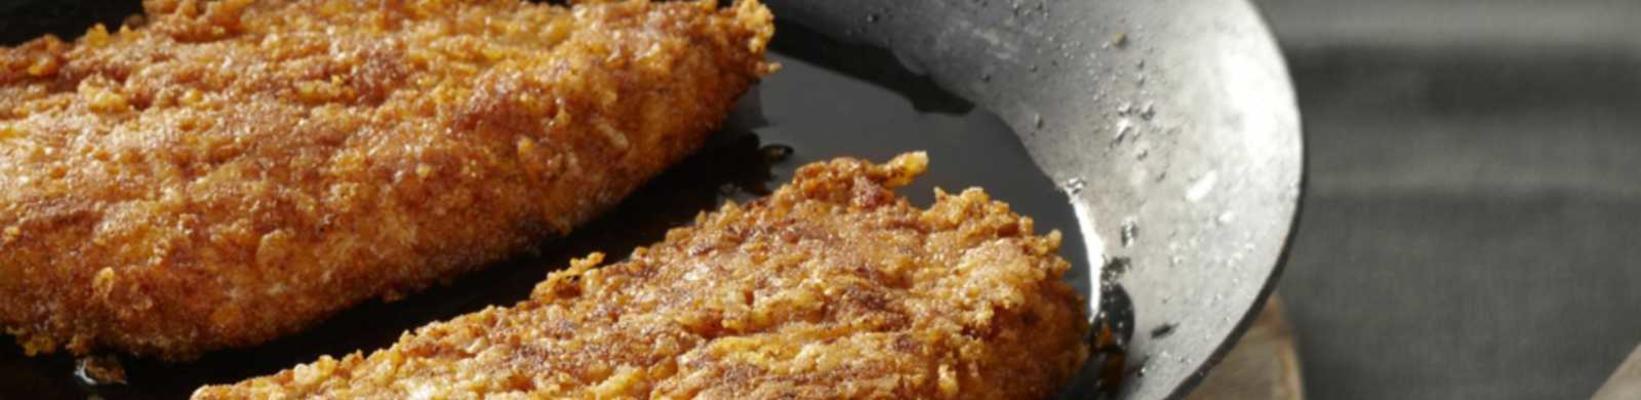 schnitzel breaded with cheesecornflakes